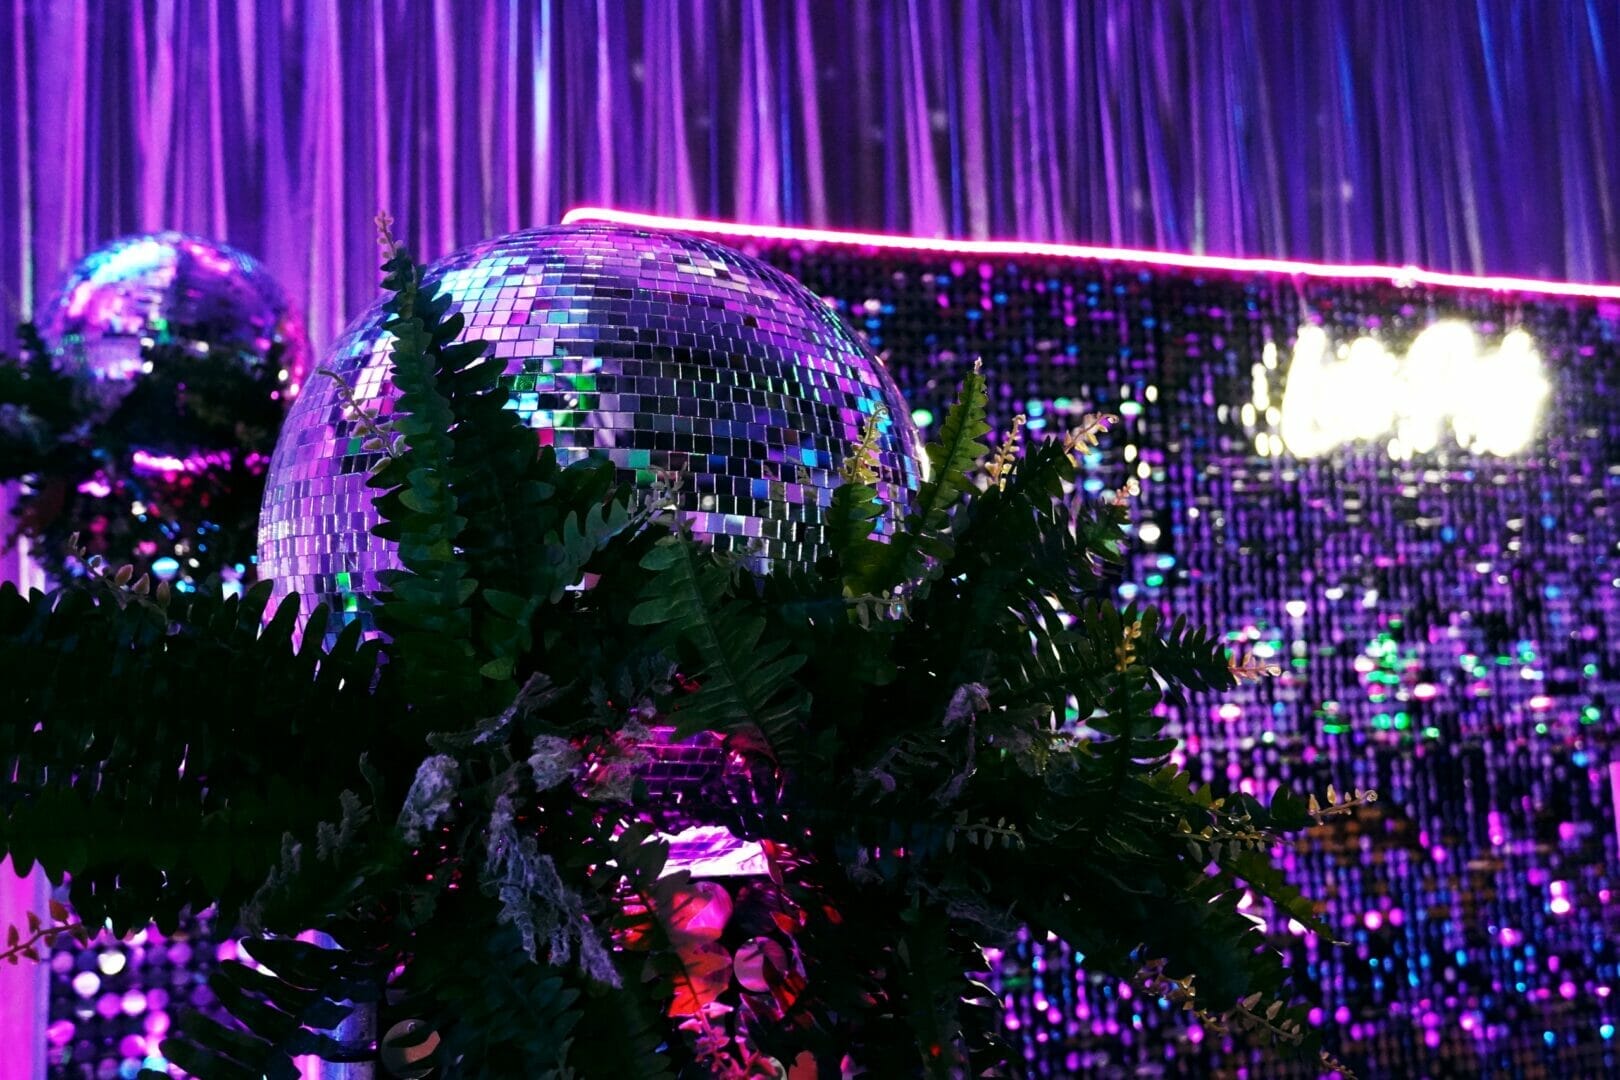 mirror balls, greenery, sequin panels, neon lights, neon sign at neon disco party theme